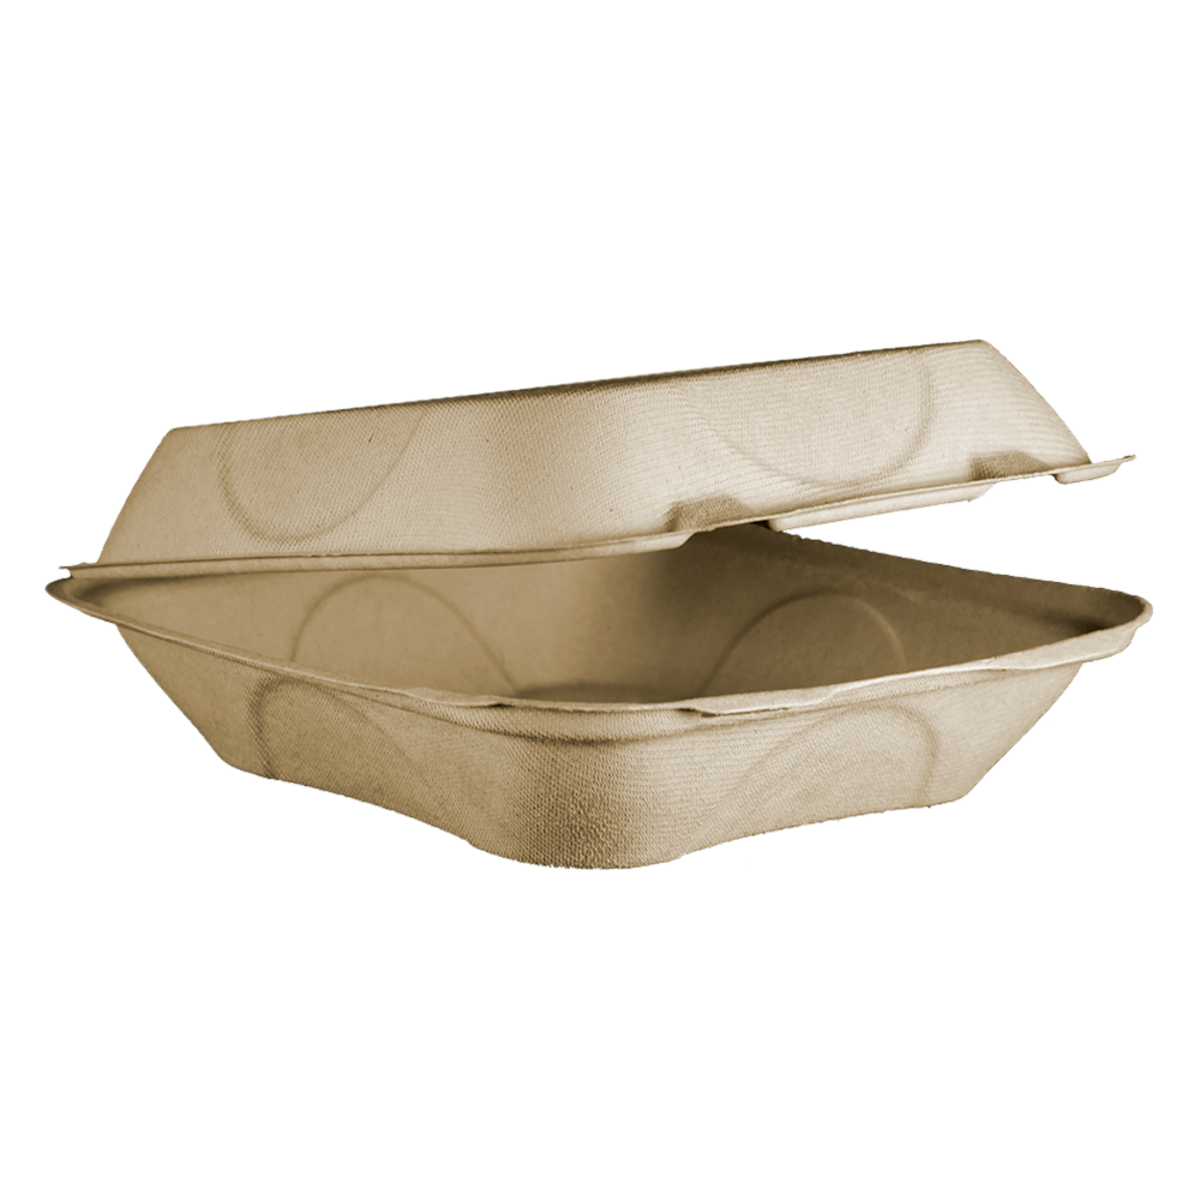 Compostable Food Containers